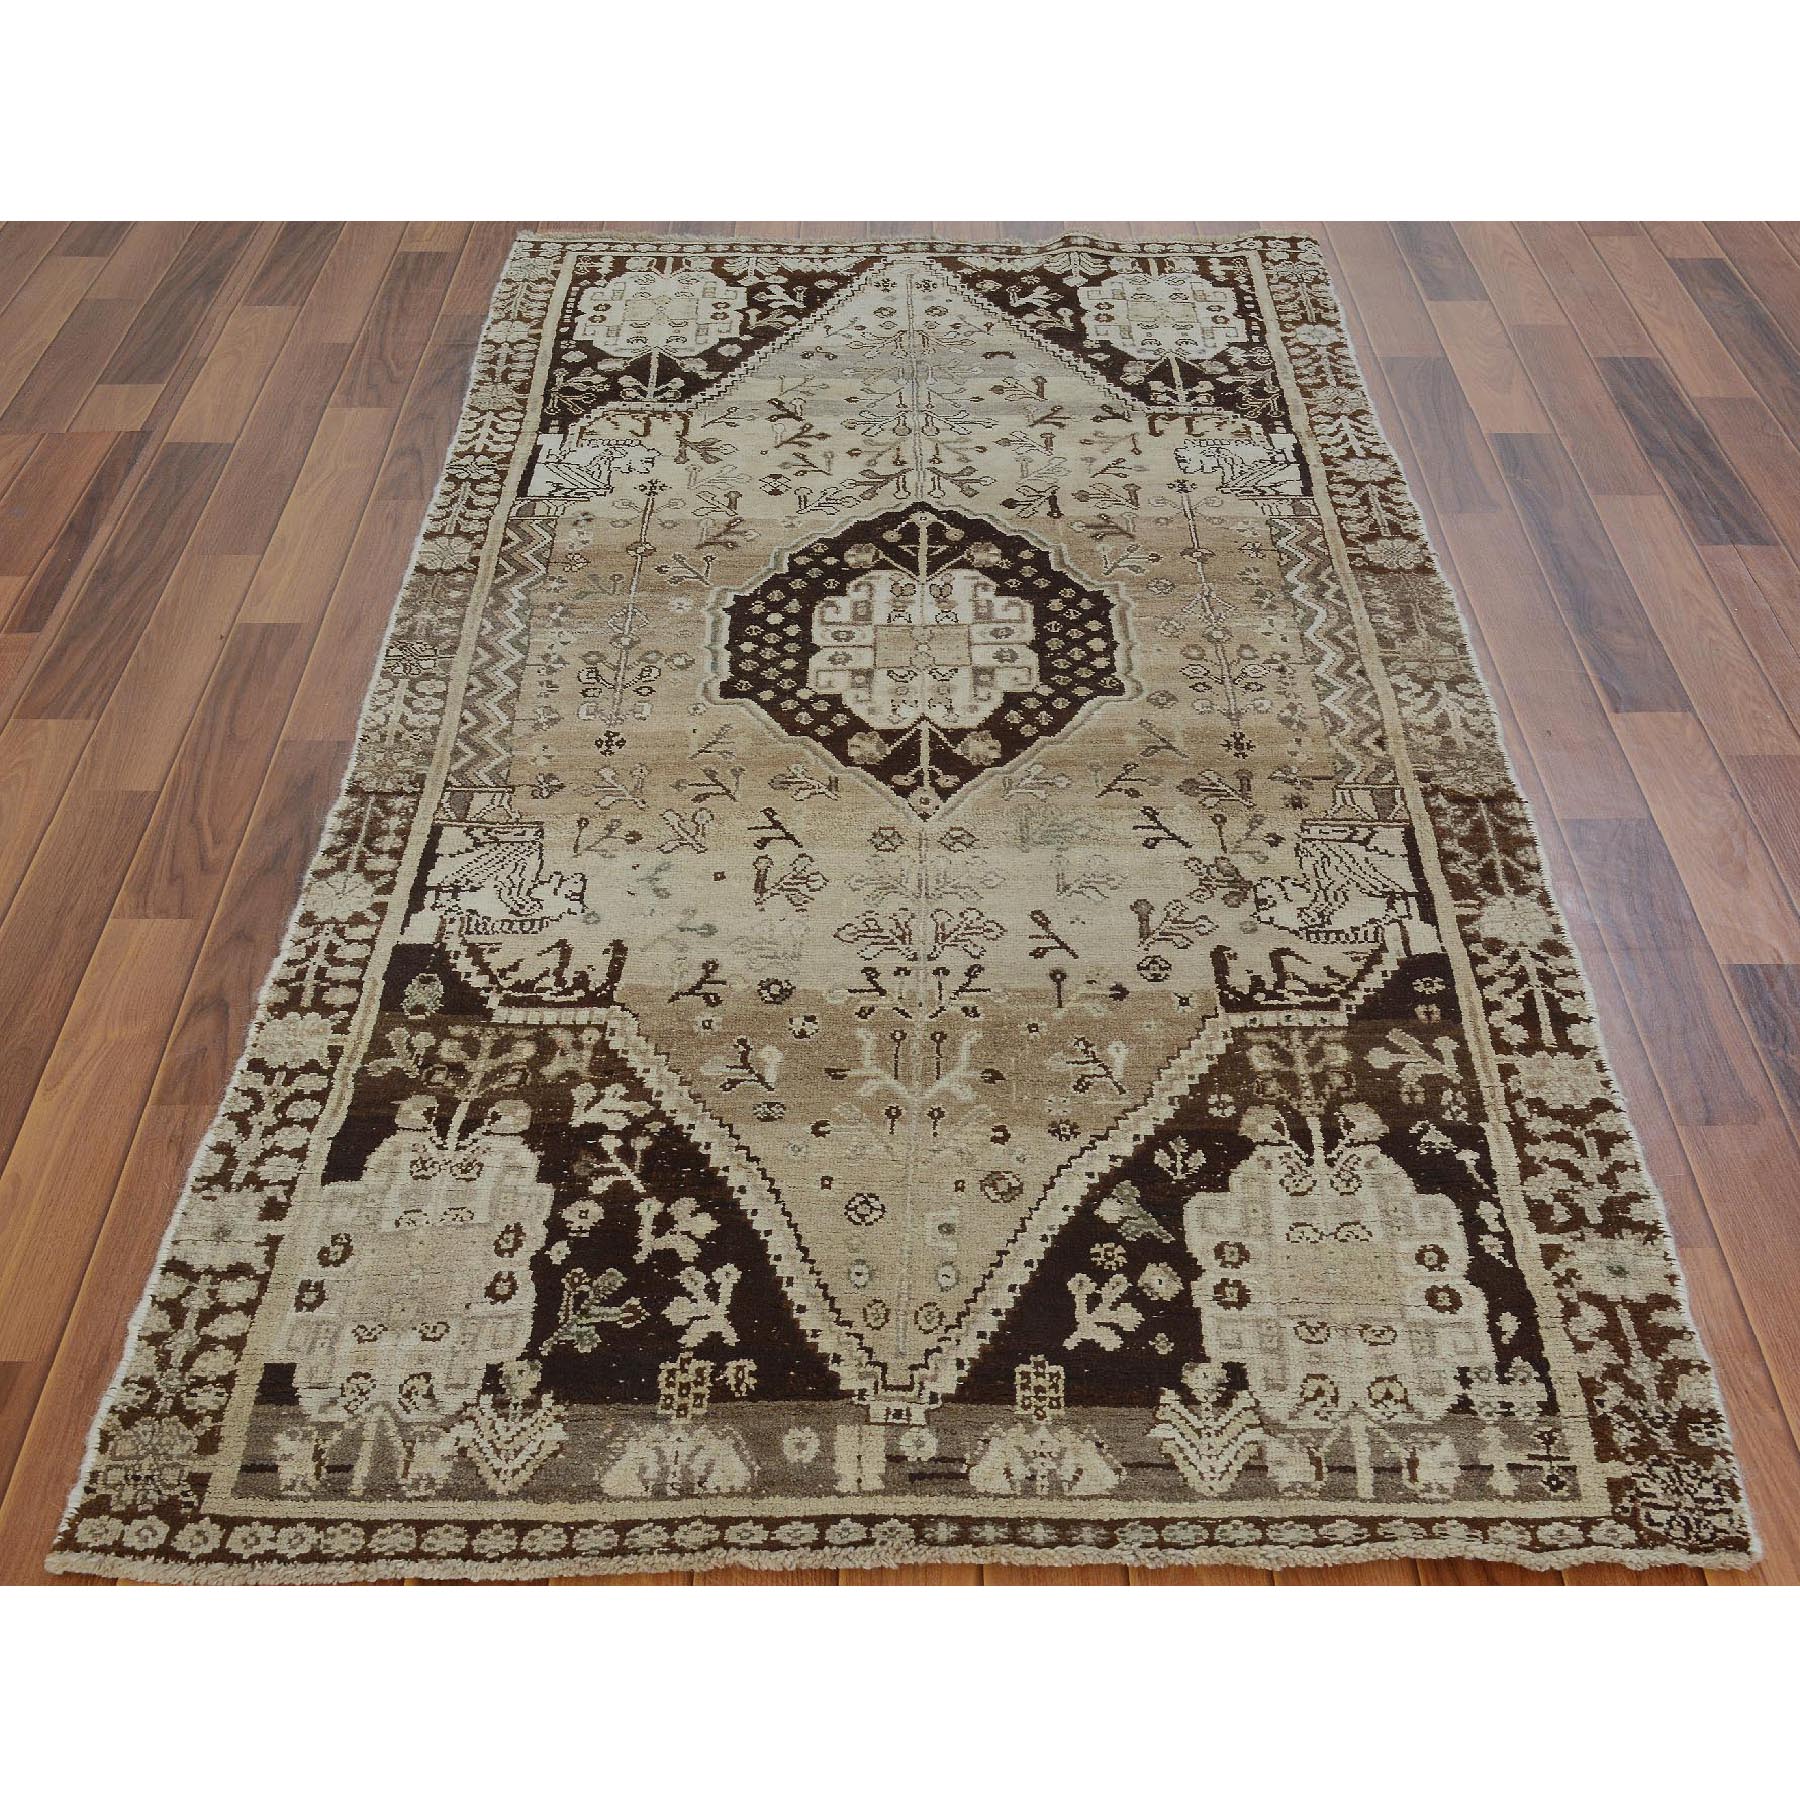 3-8 x7-9   Earth Tone Colors Old And Worn Down Persian Shiraz Wide Runner Hand Knotted Bohemian Rug 